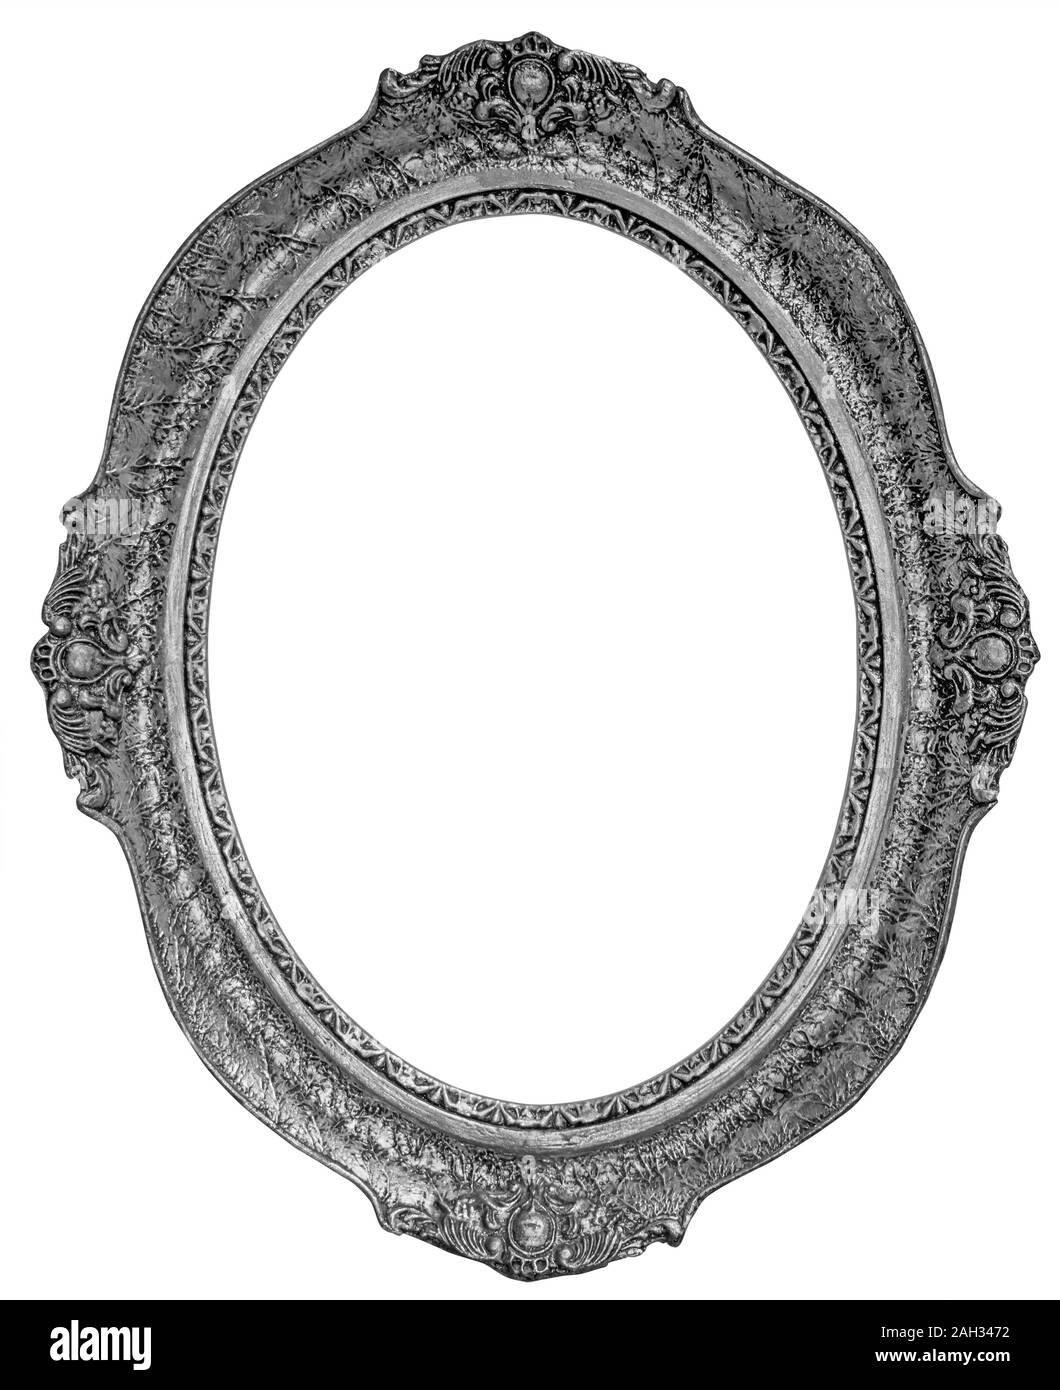 Old wooden silver plated oval Frame Isolated on white background Stock Photo